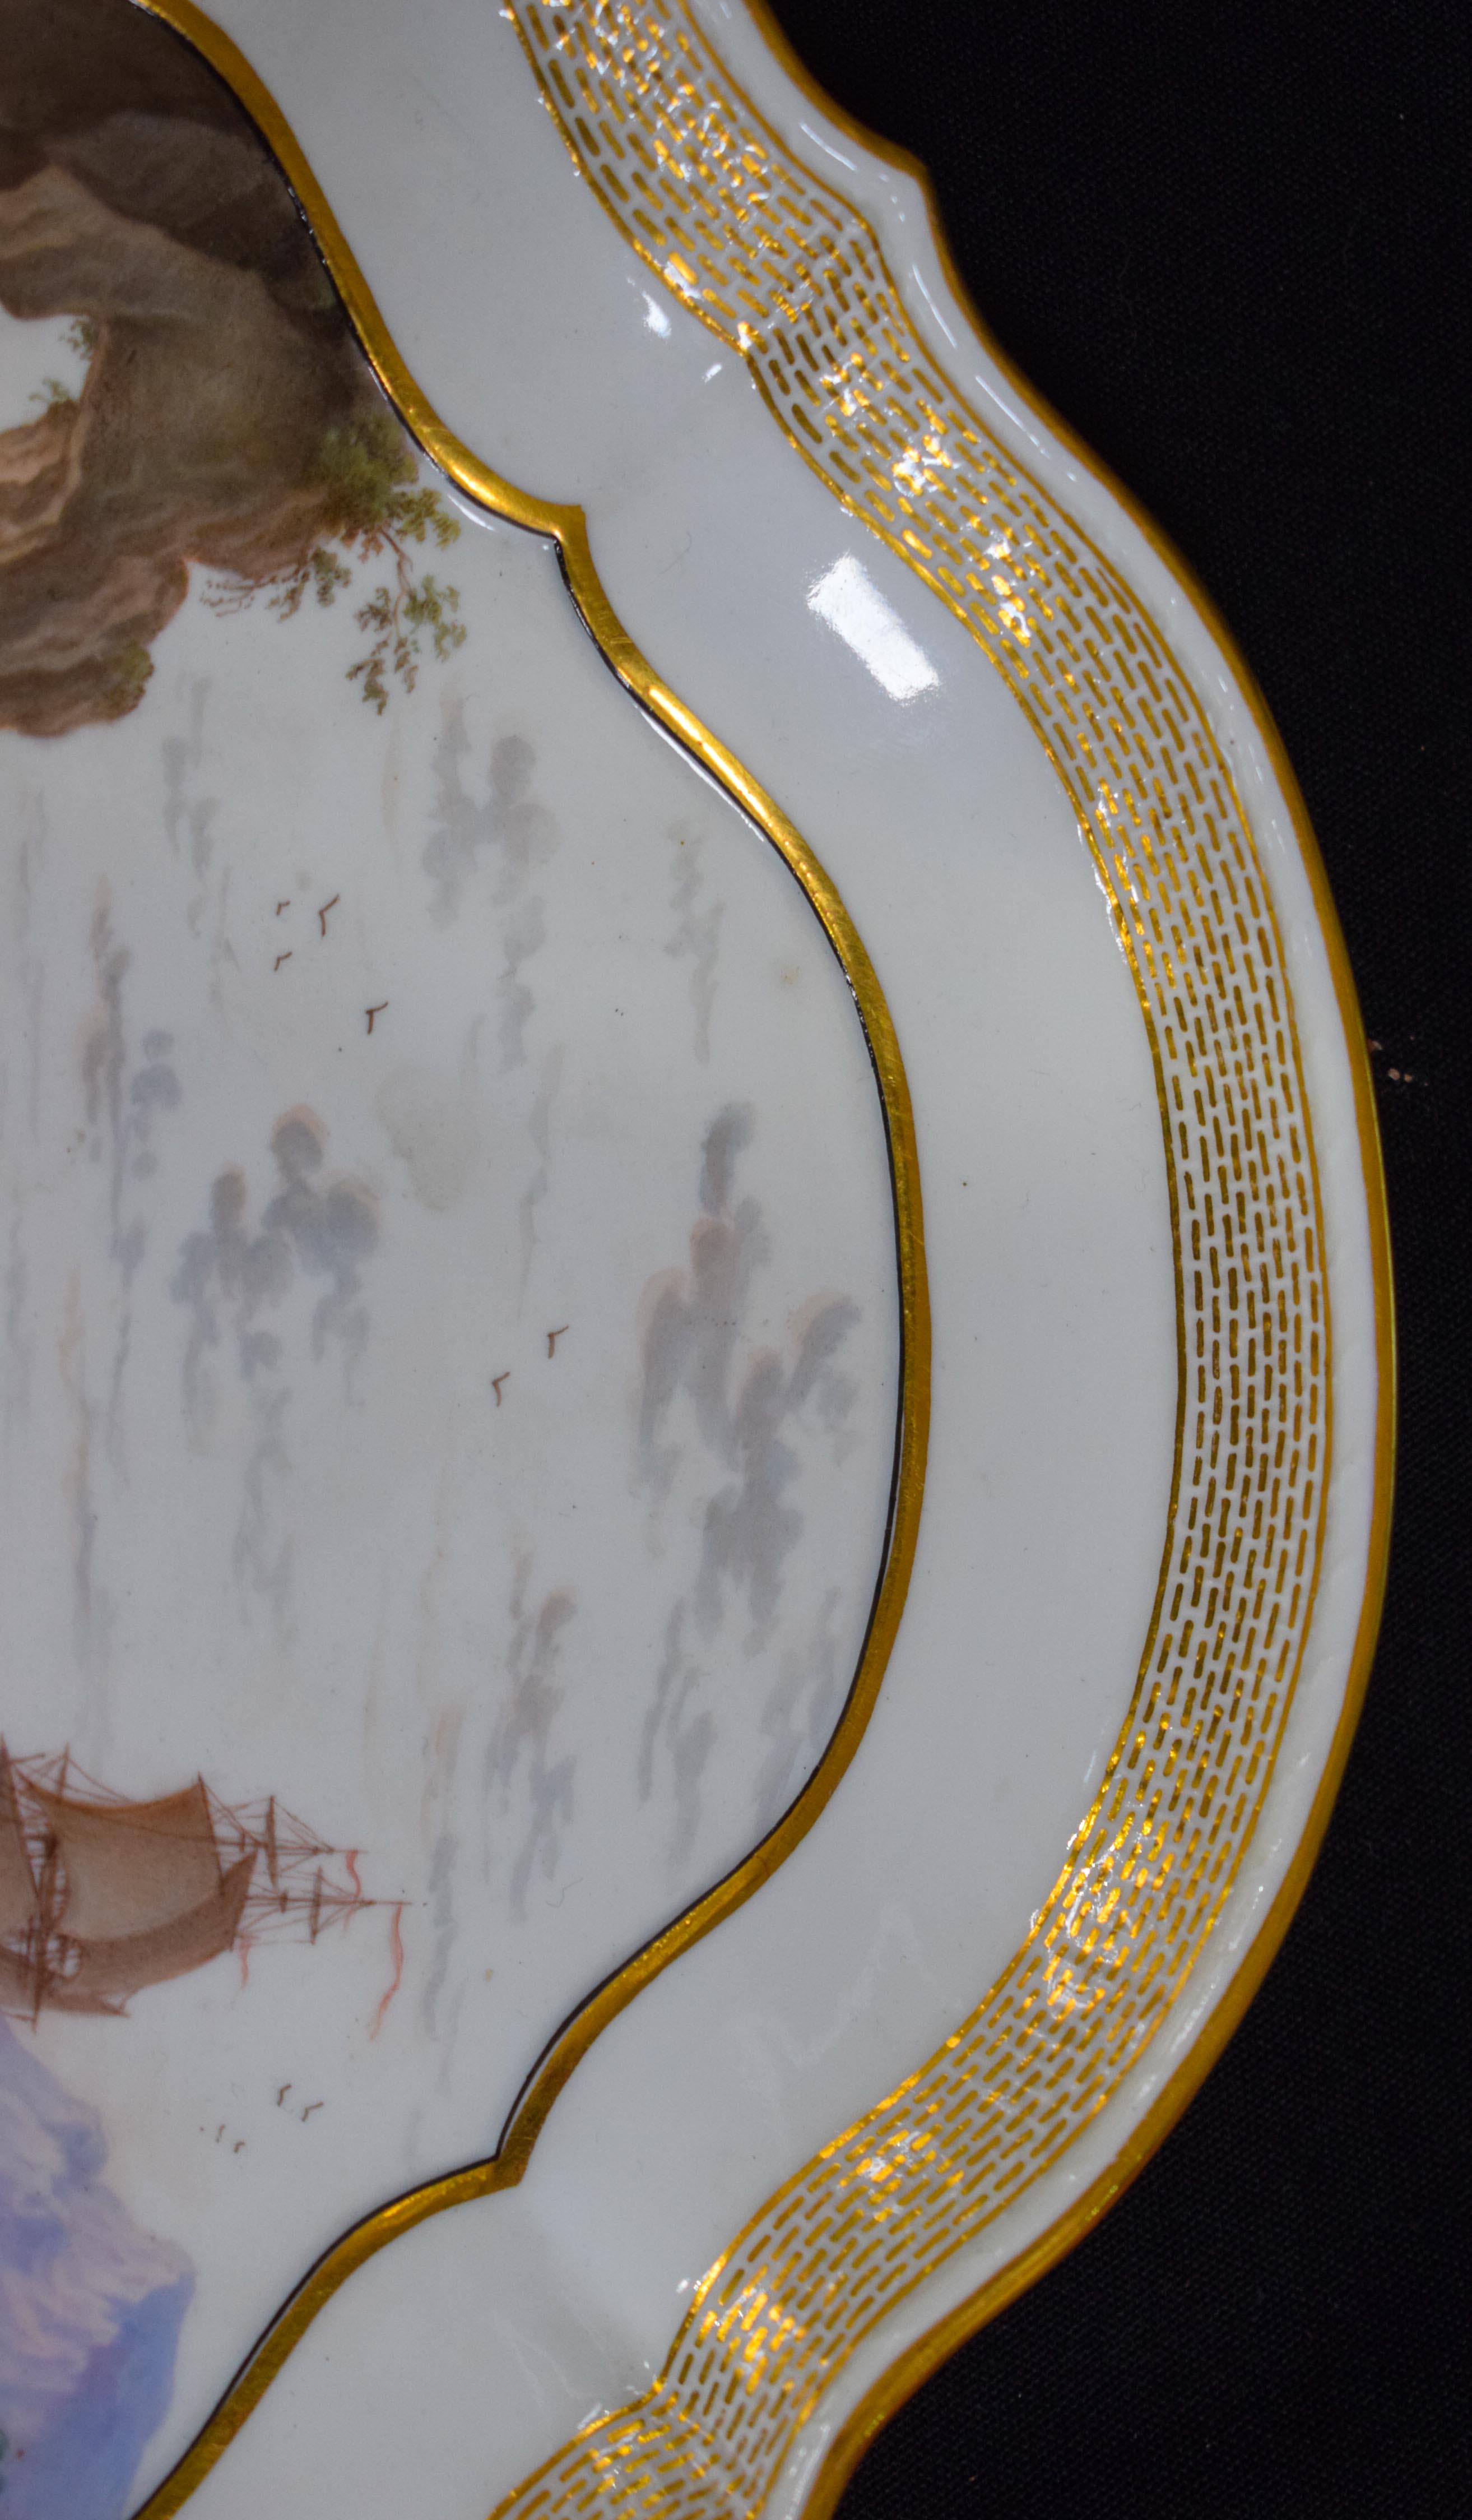 A FINE PAIR OF 18TH/19TH CENTURY MEISSEN TWIN HANDLED PORCELAIN DISHES painted with coastal views. 2 - Image 9 of 19